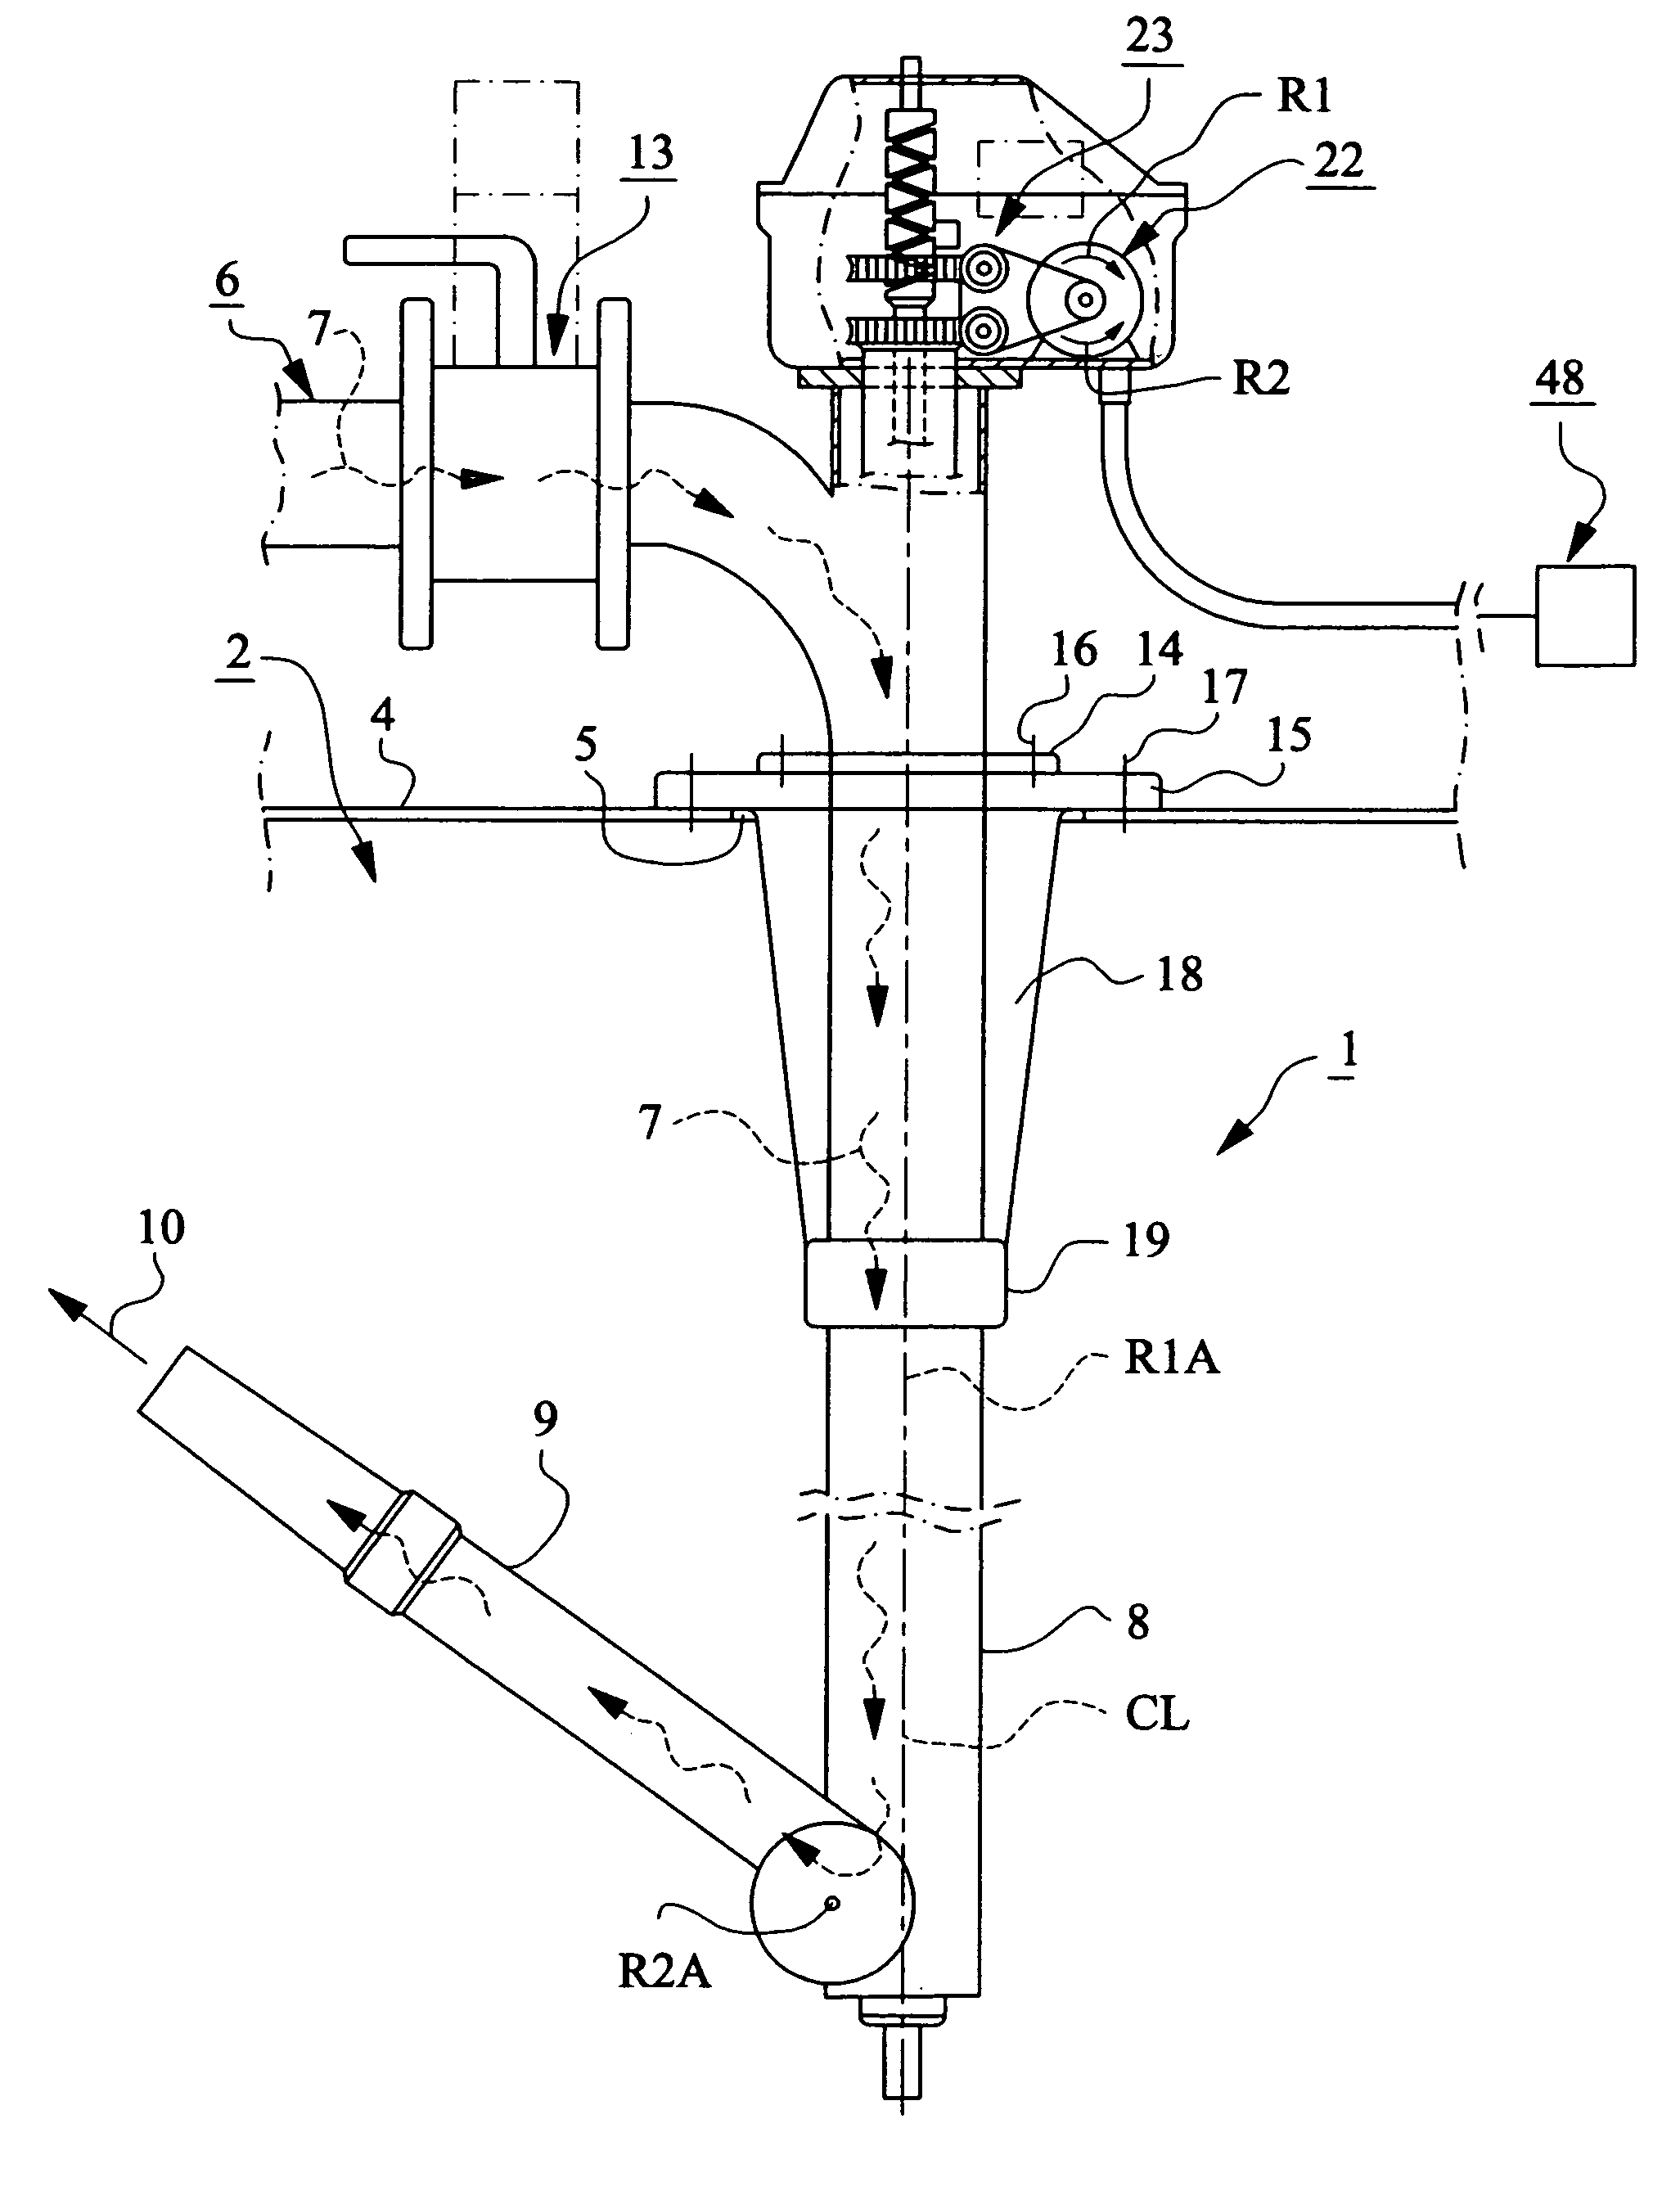 Device for interior flushing of tanks or containers